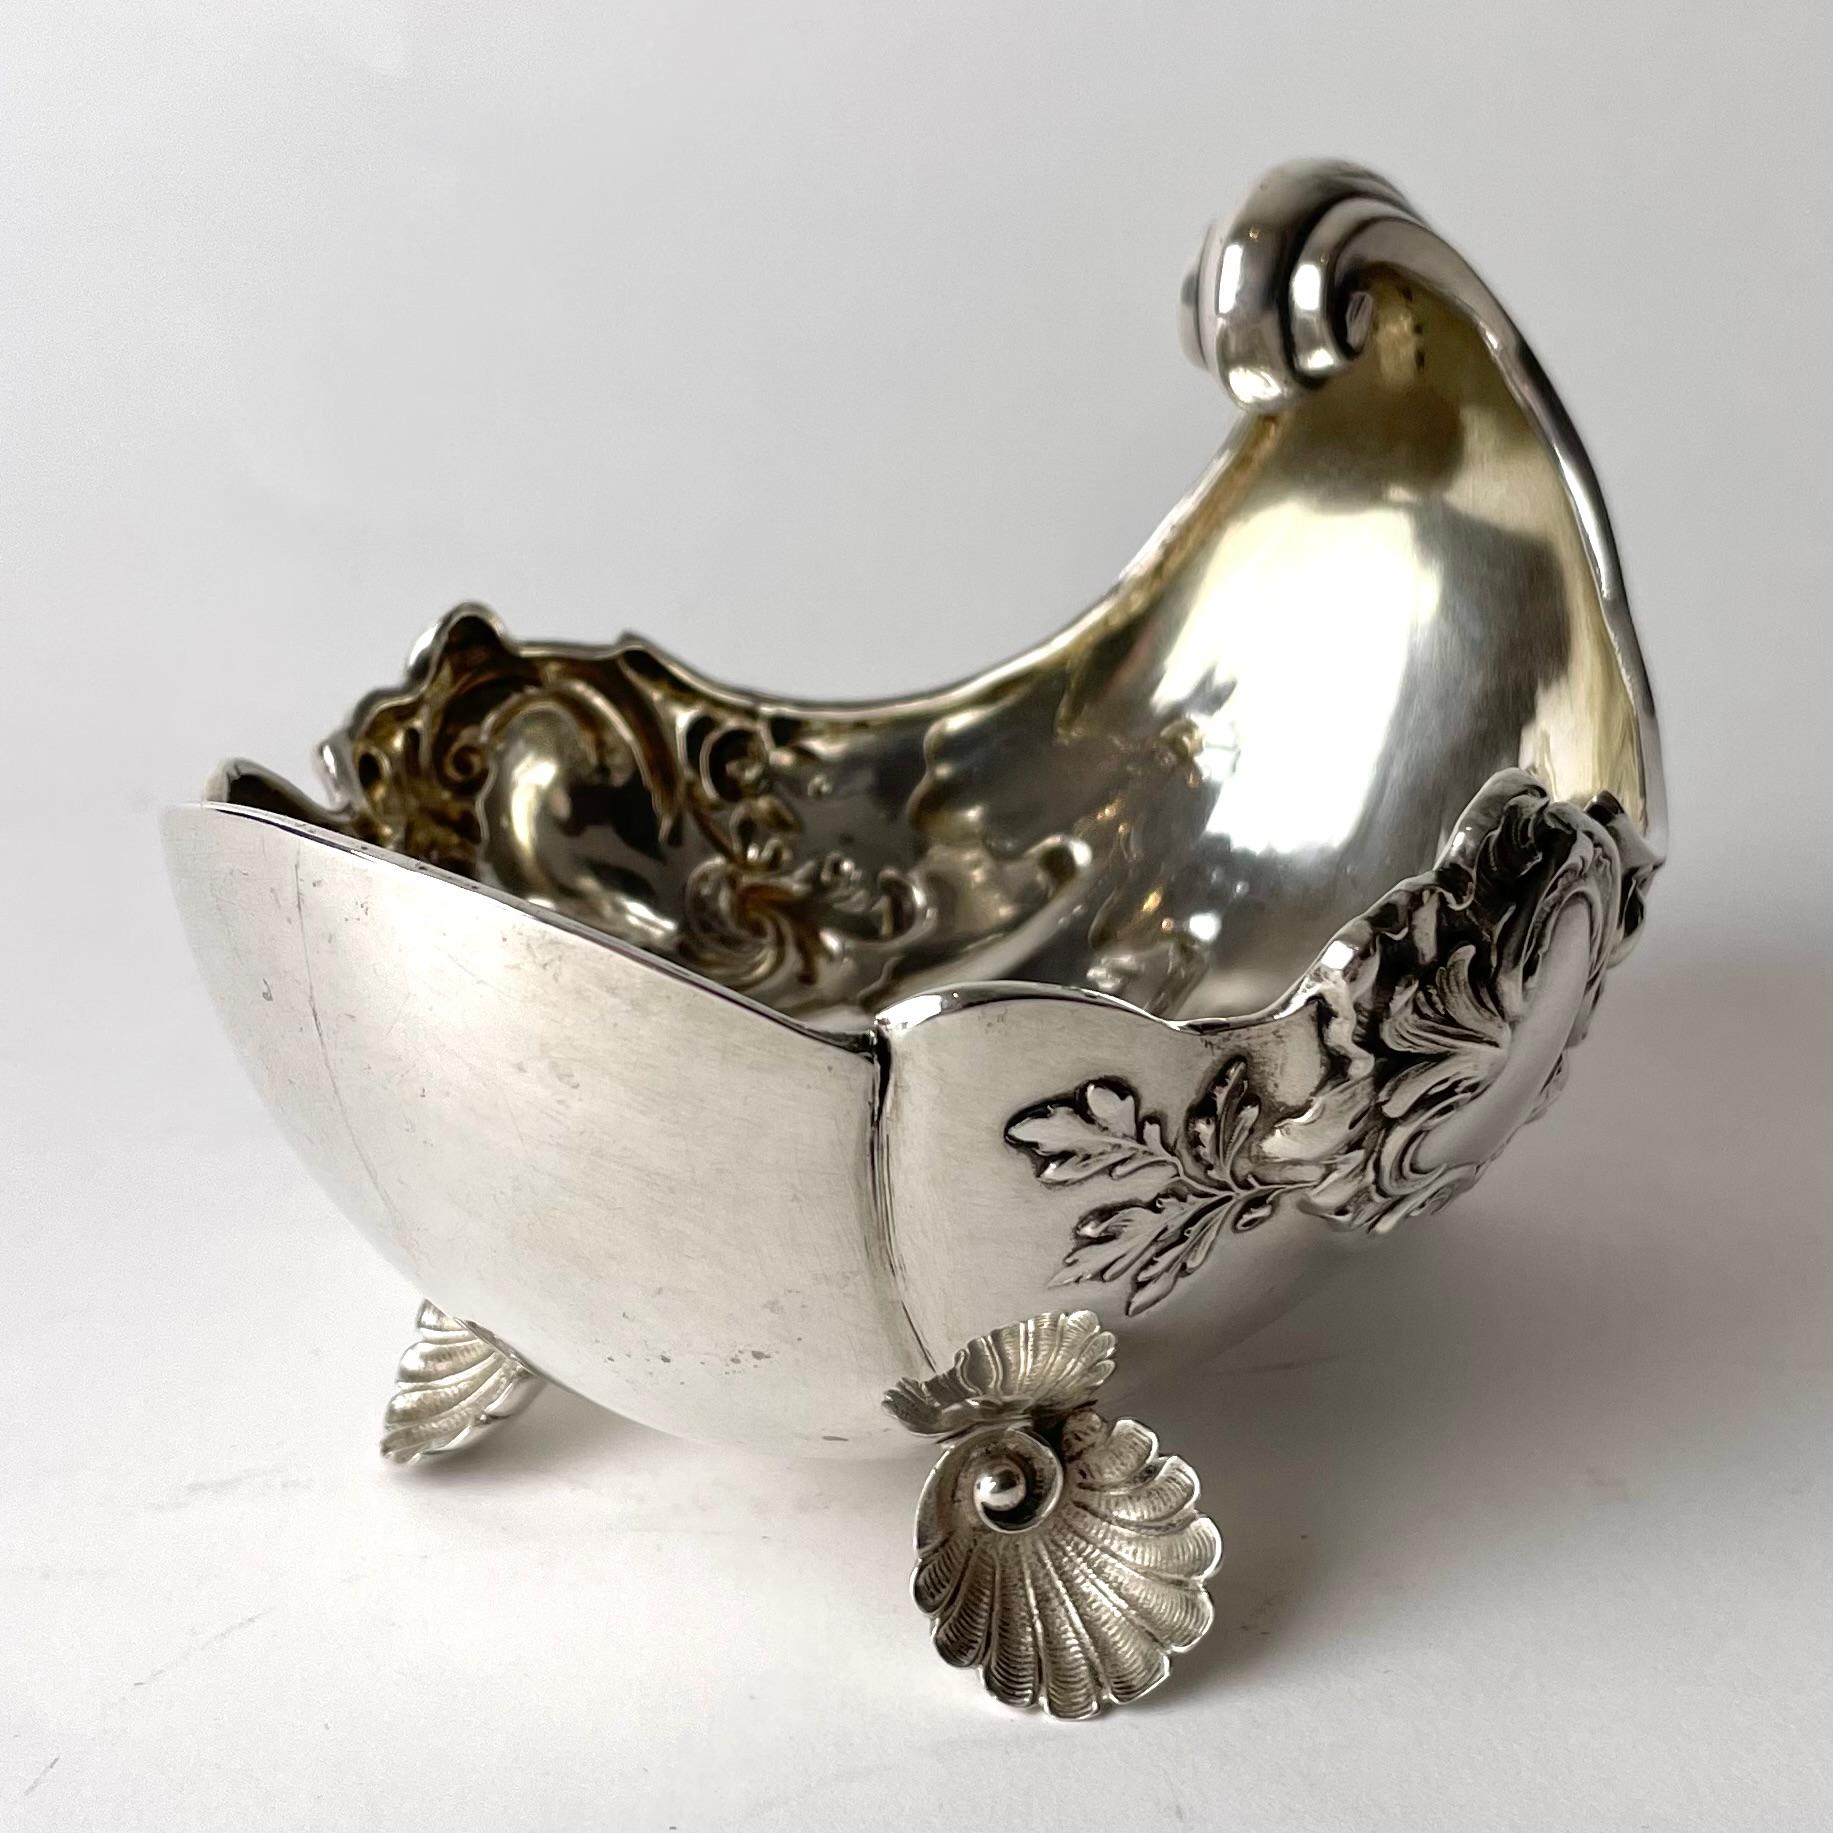 Beautiful Candy Bowl in Silver in the shape of a seashell from Mid 19th Century. The bowl is designed as a seashell with three feet also designed as seashells.


Wear consistent with age and use 